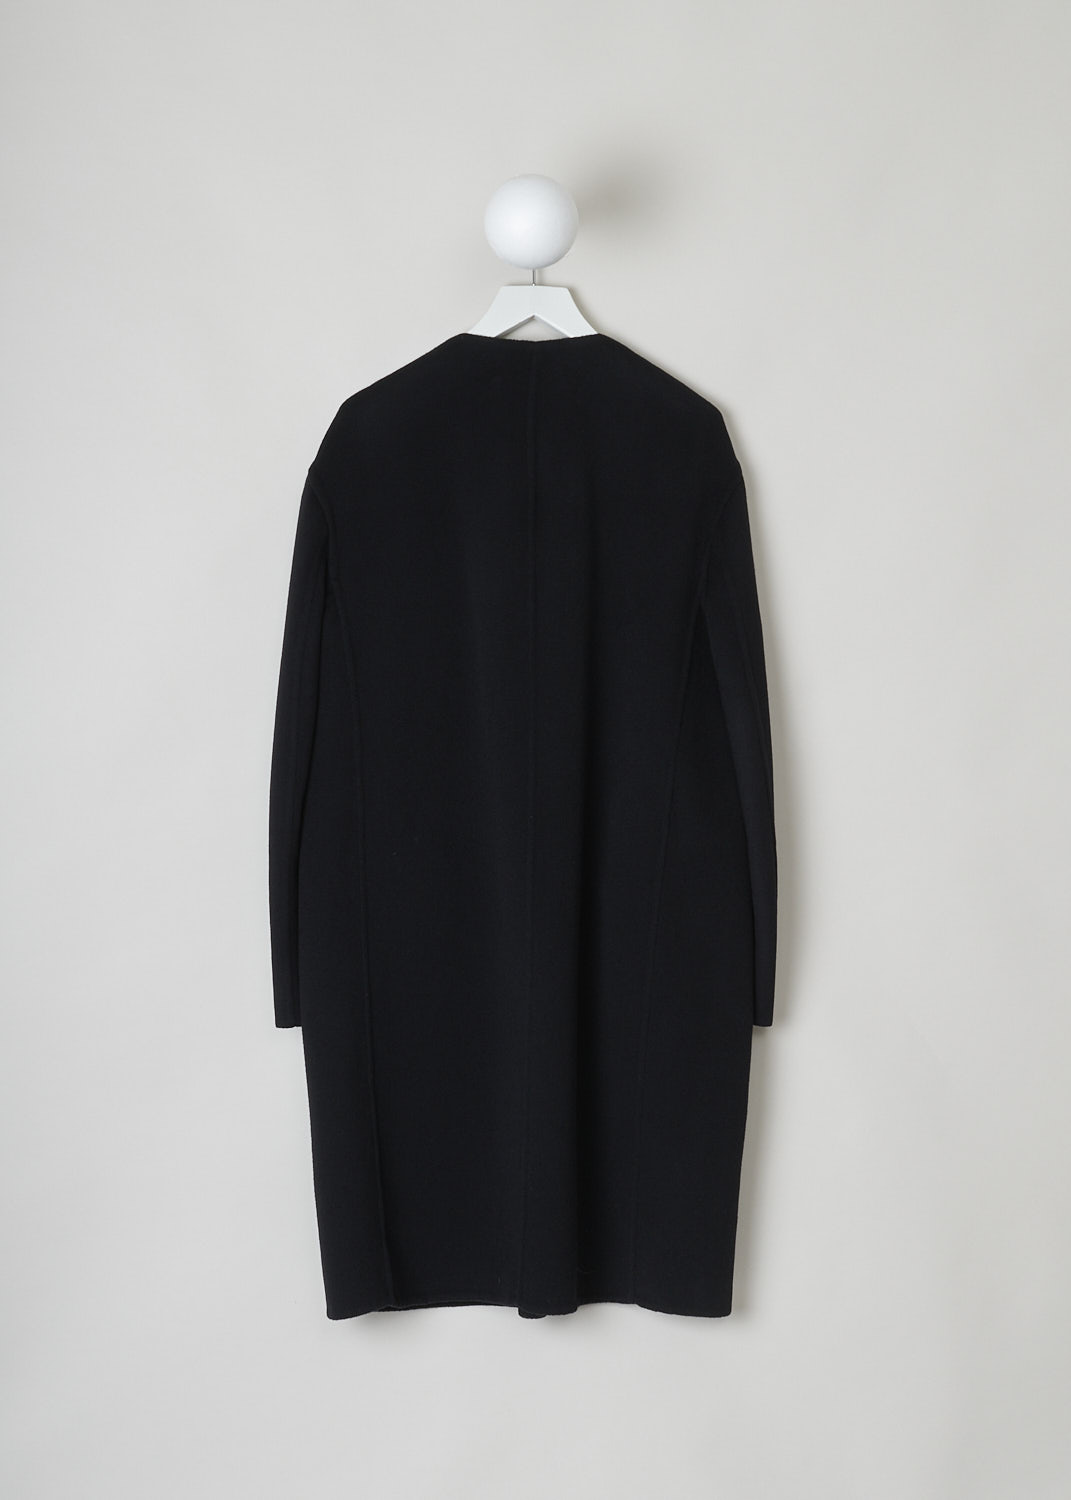 MARNI, LONG BLACK DUSTER COAT, SPMA0048KU_TW888_00N99, Back, Black, This long collarless duster coat in black features a front button closure with round metal buttons. The long sleeves are lined. Slanted pockets are concealed in the side seams. The coat has a straight hemline. 
